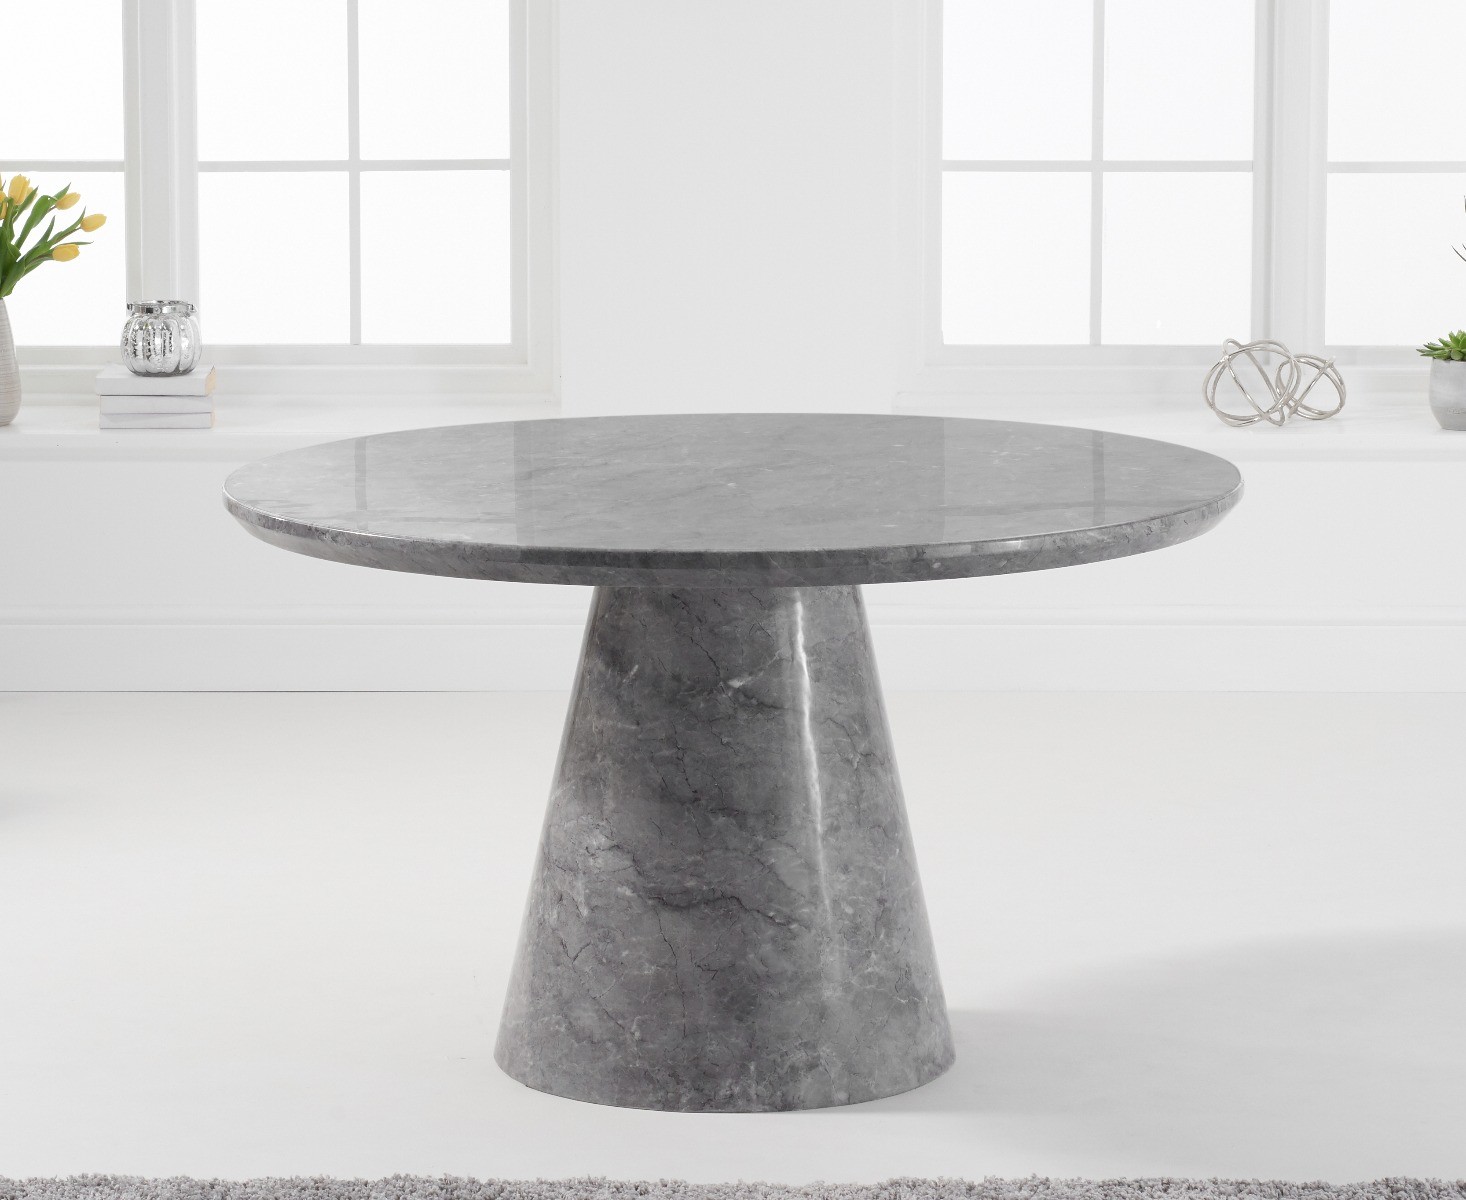 Photo 3 of Ravello 130cm round grey marble dining table with 6 grey sienna velvet chairs